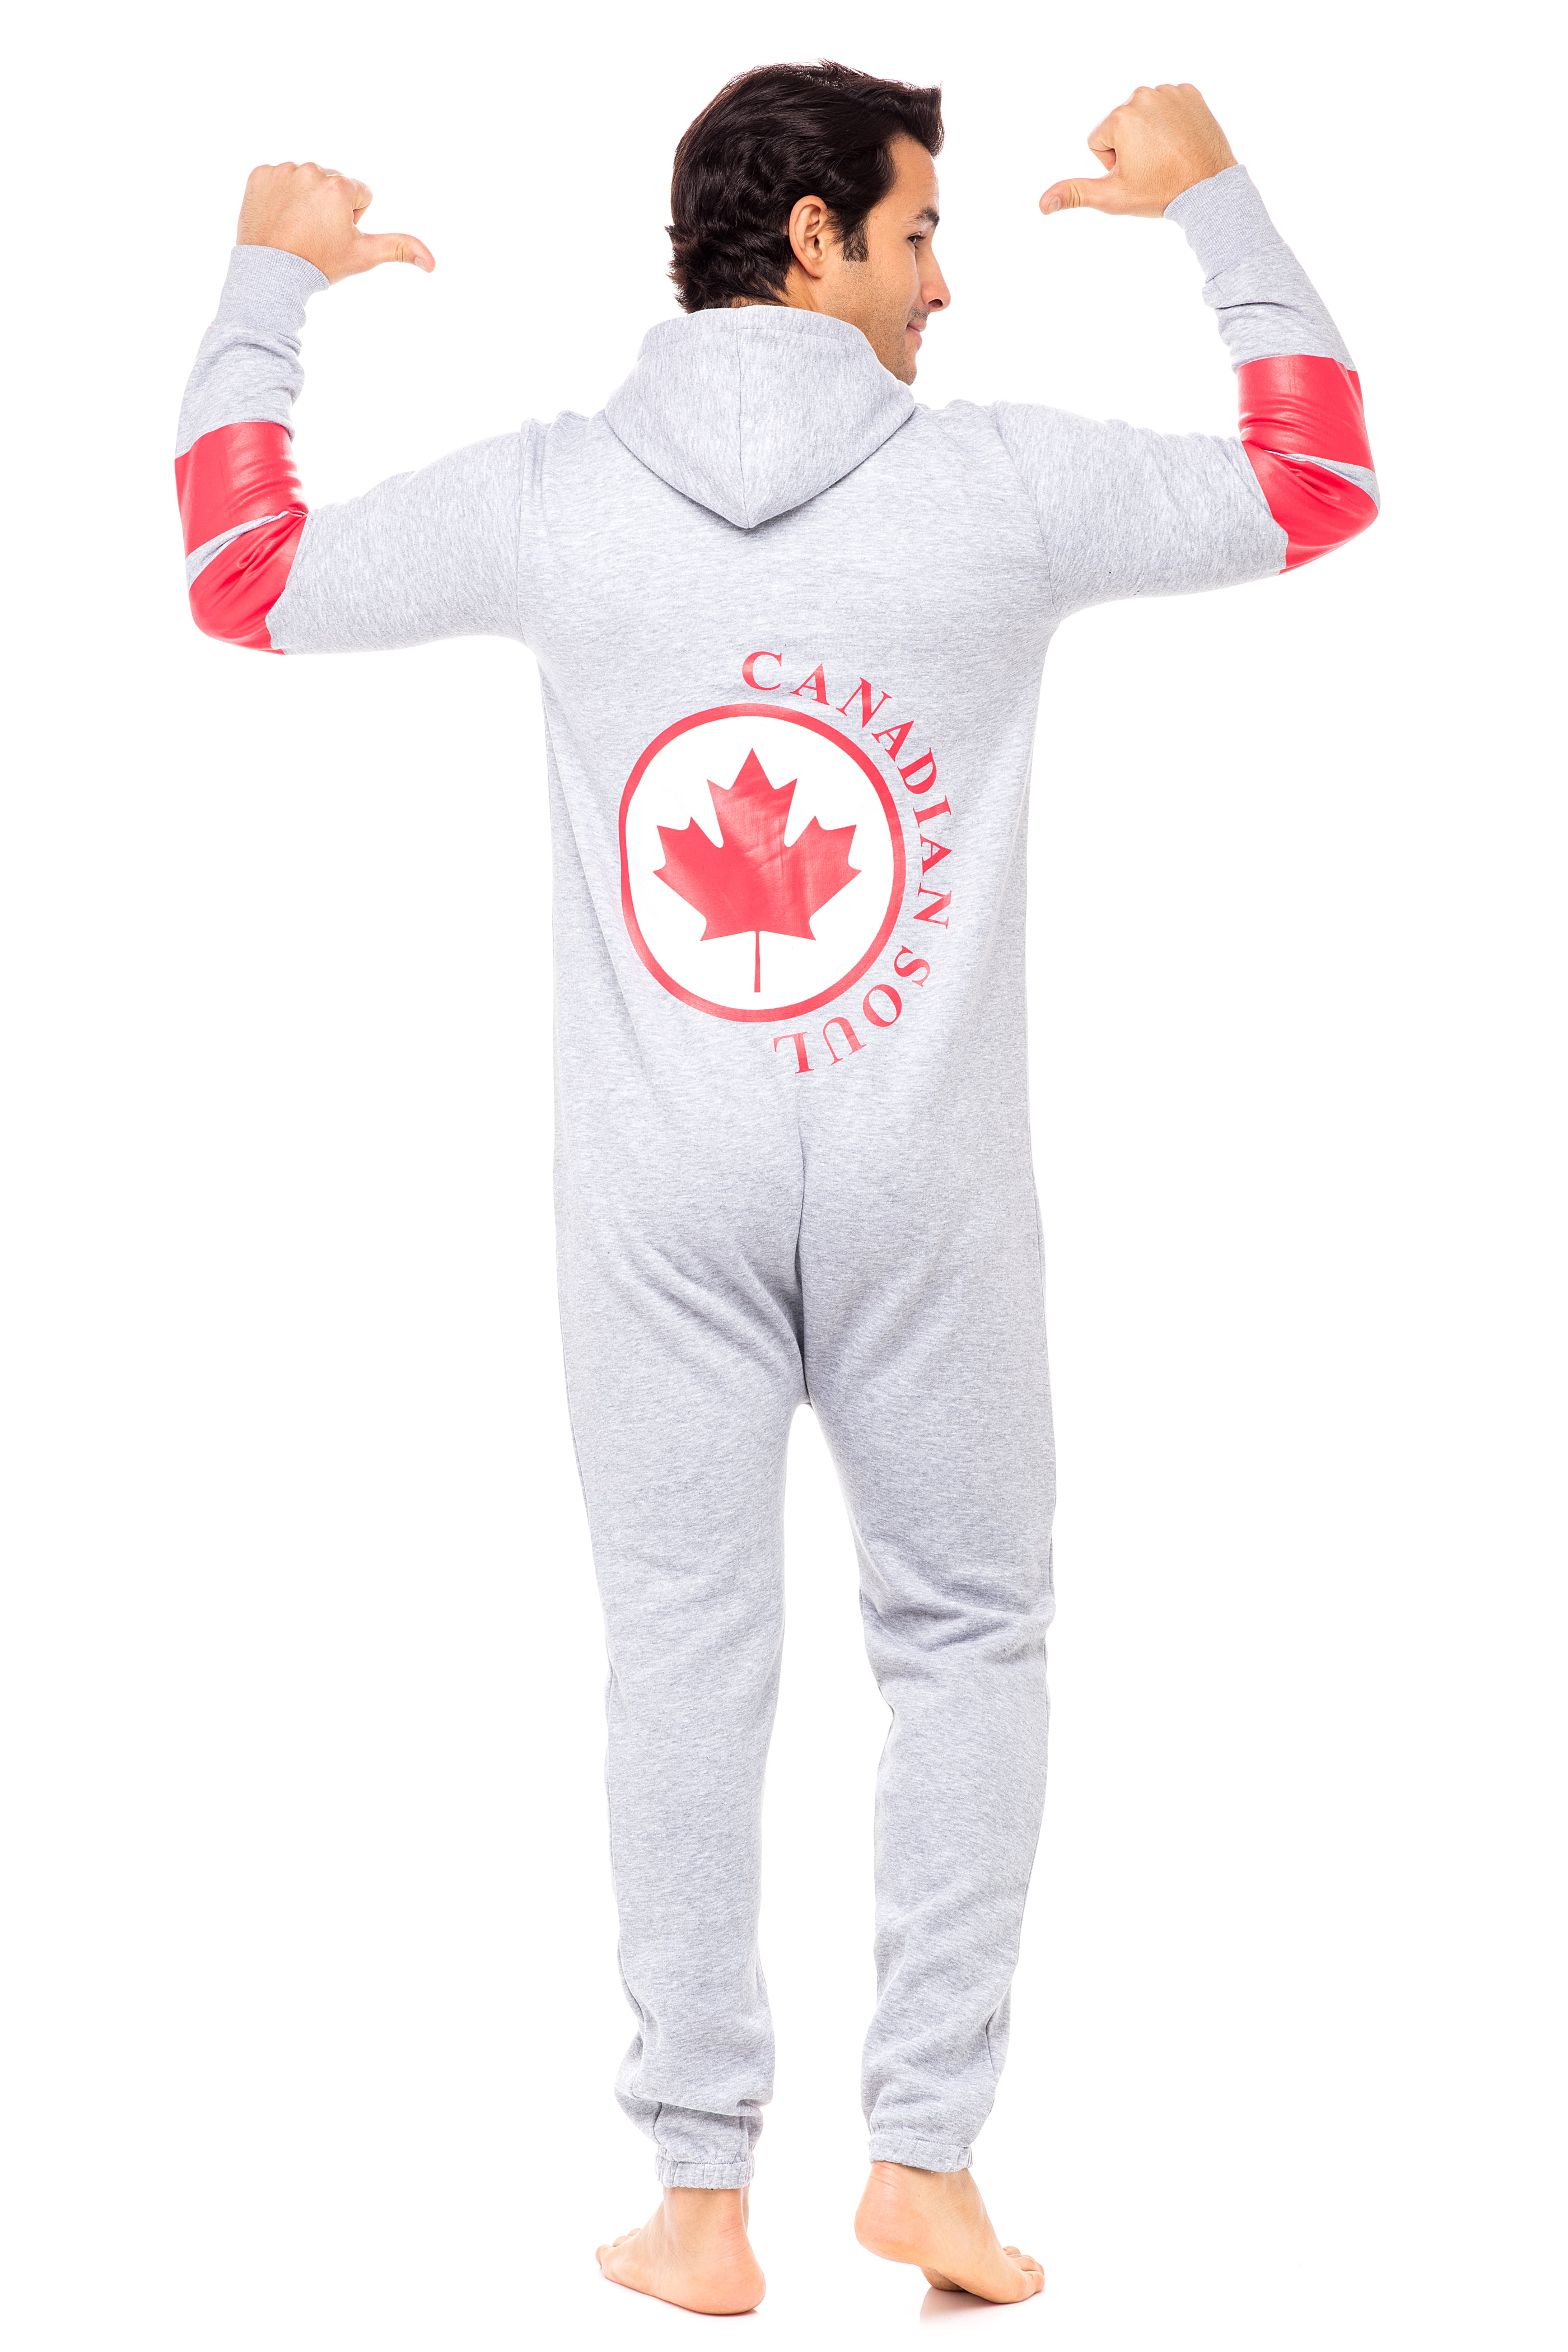 SKYLINEWEARS Mens Onesie Playsuit Jumpsuit one Piece Non Footed Pajamas Canadian Flag